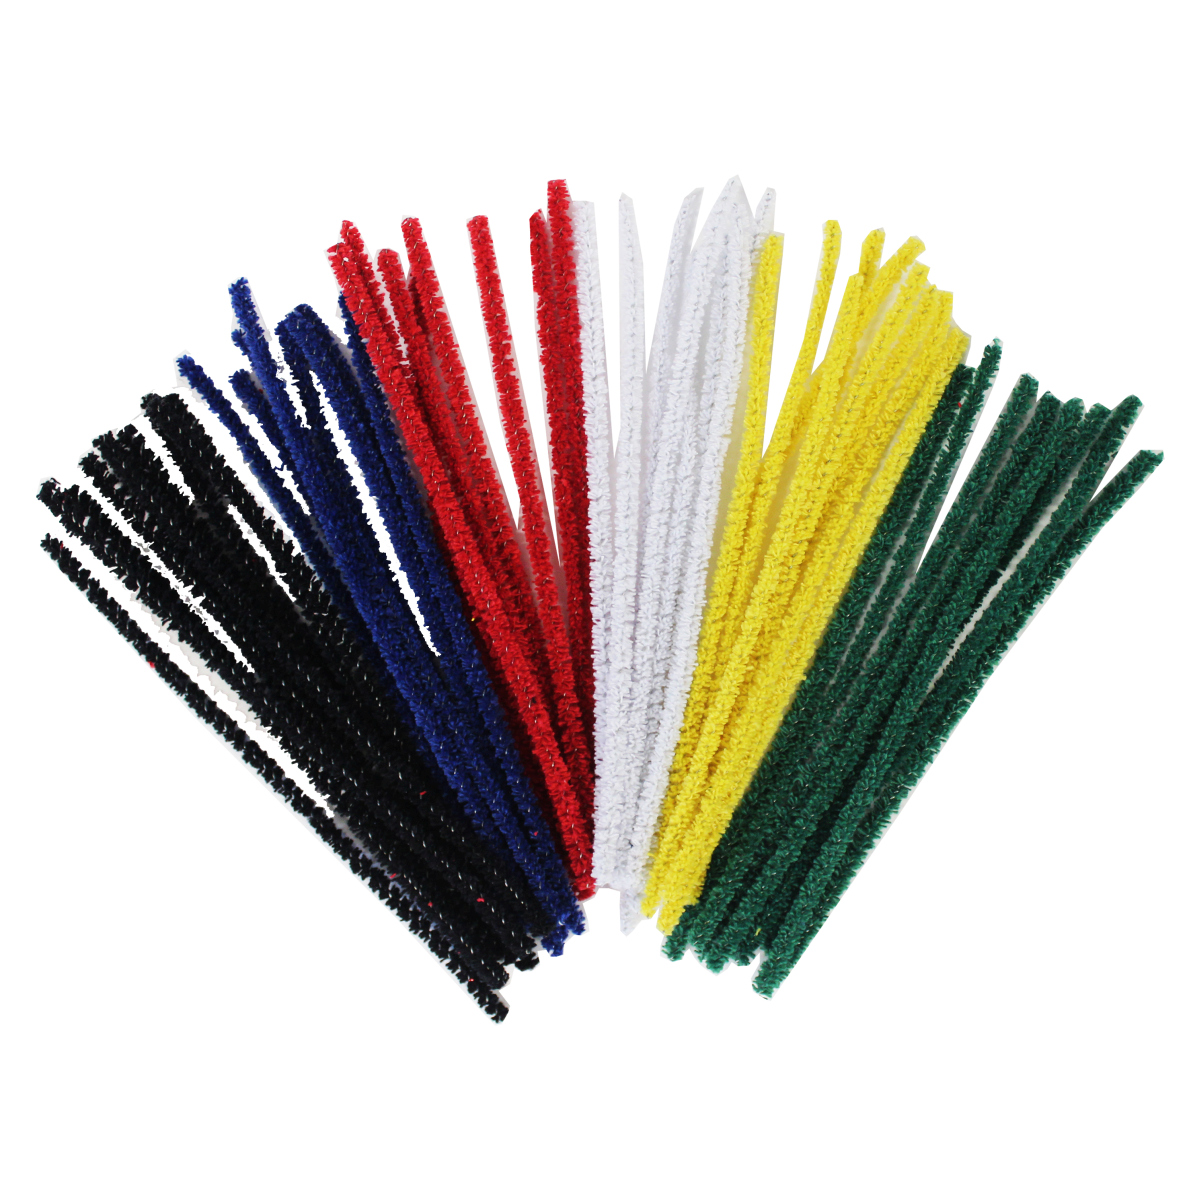 Pipe Cleaner Cotton Jasart 150mm Assorted Pkt1000 (FS)